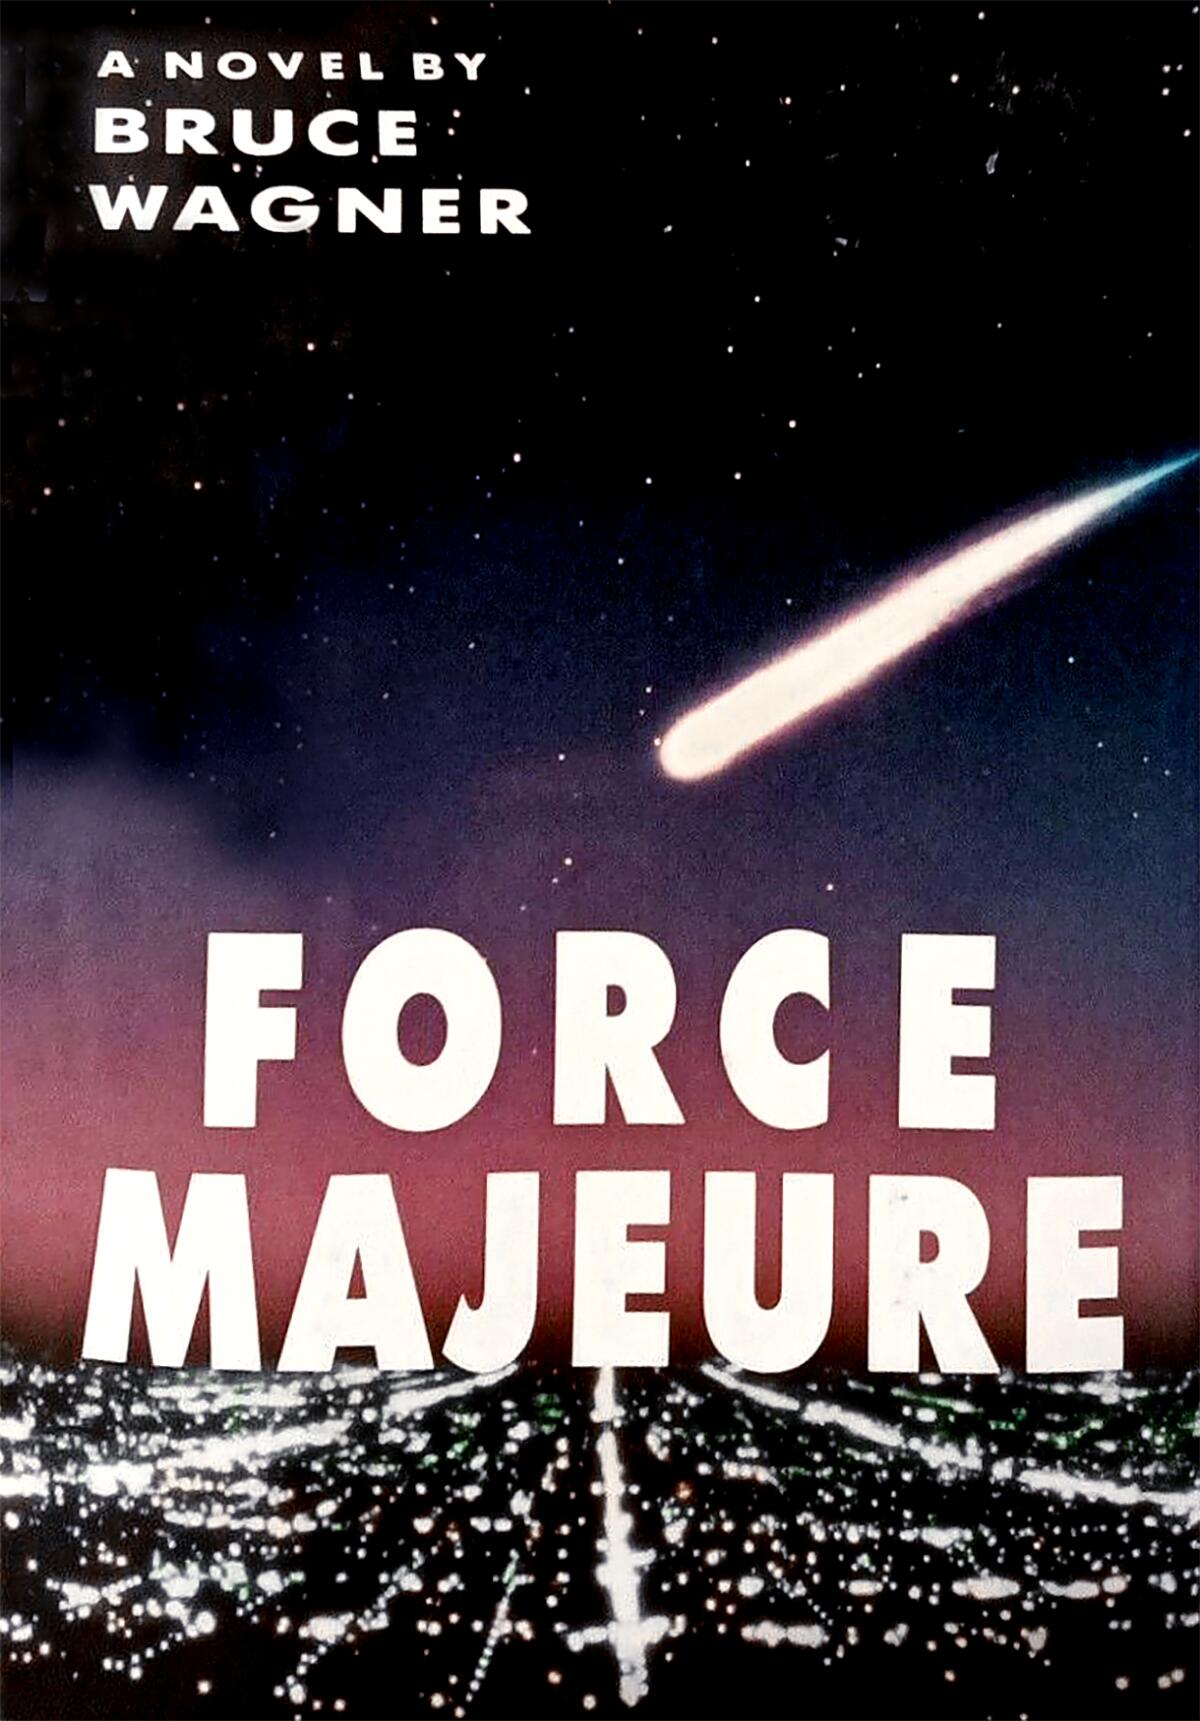 "Force Majeur" by Bruce Wagner, 1991